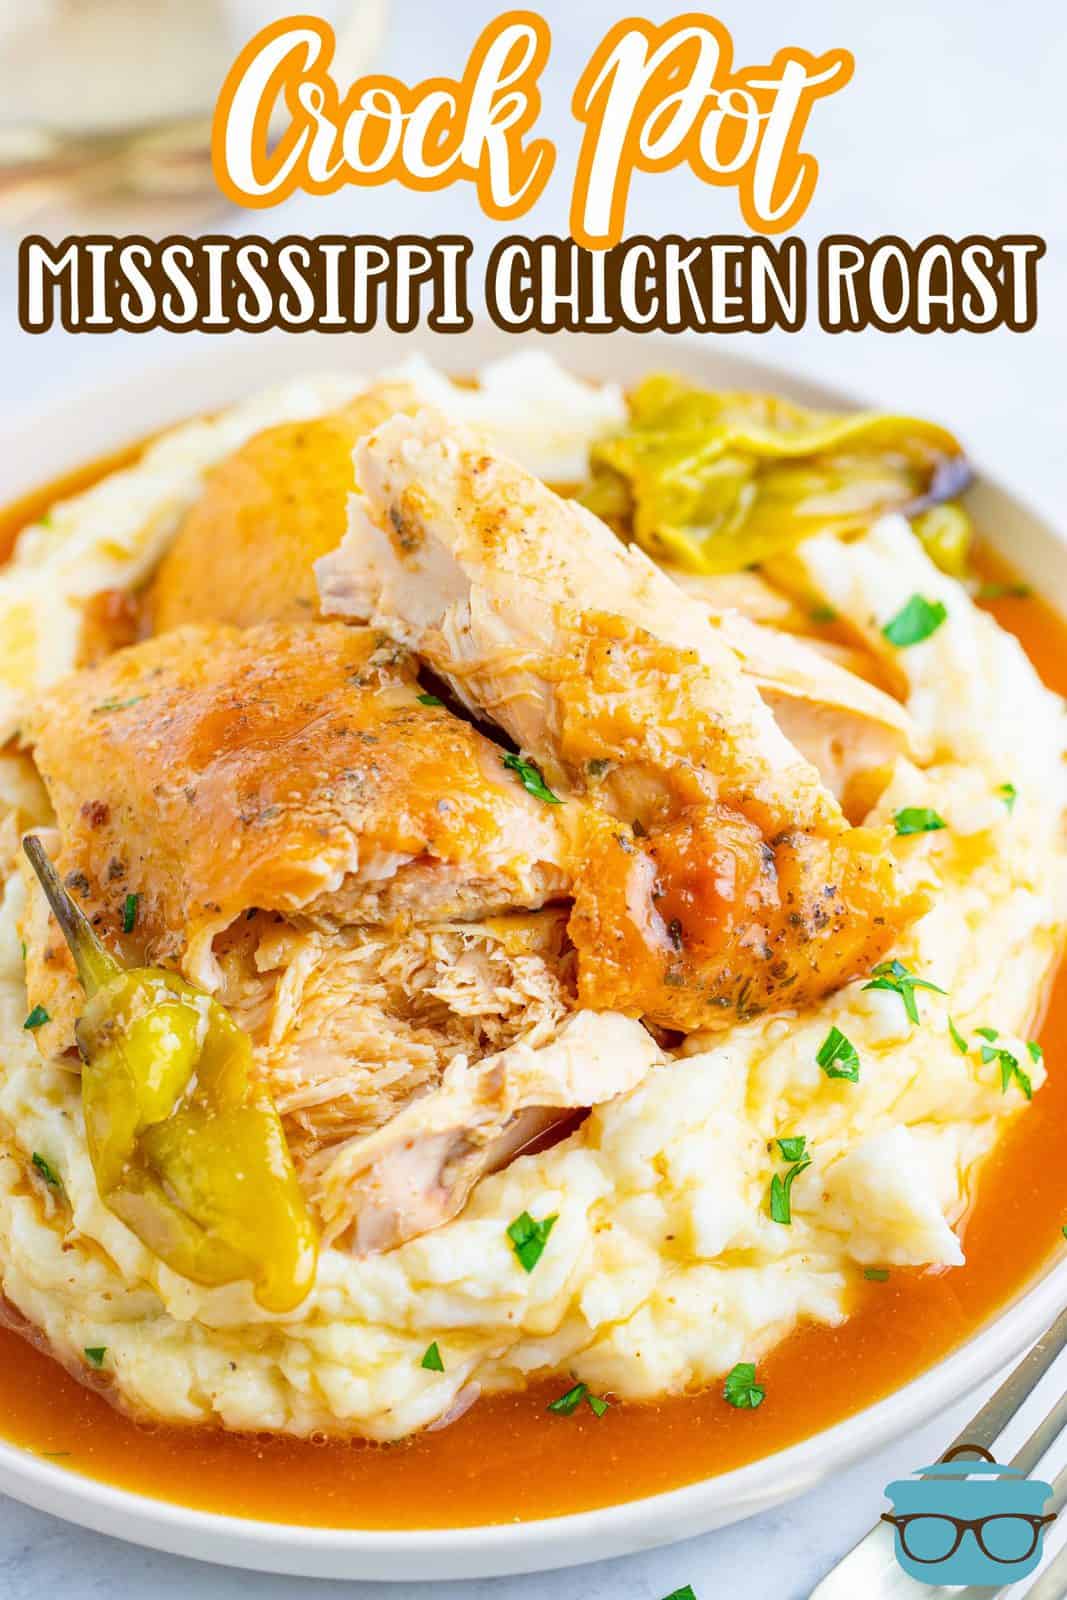 Crock Pot Mississippi Roast Chicken on platter with mashed potatoes, peppers and gravy.